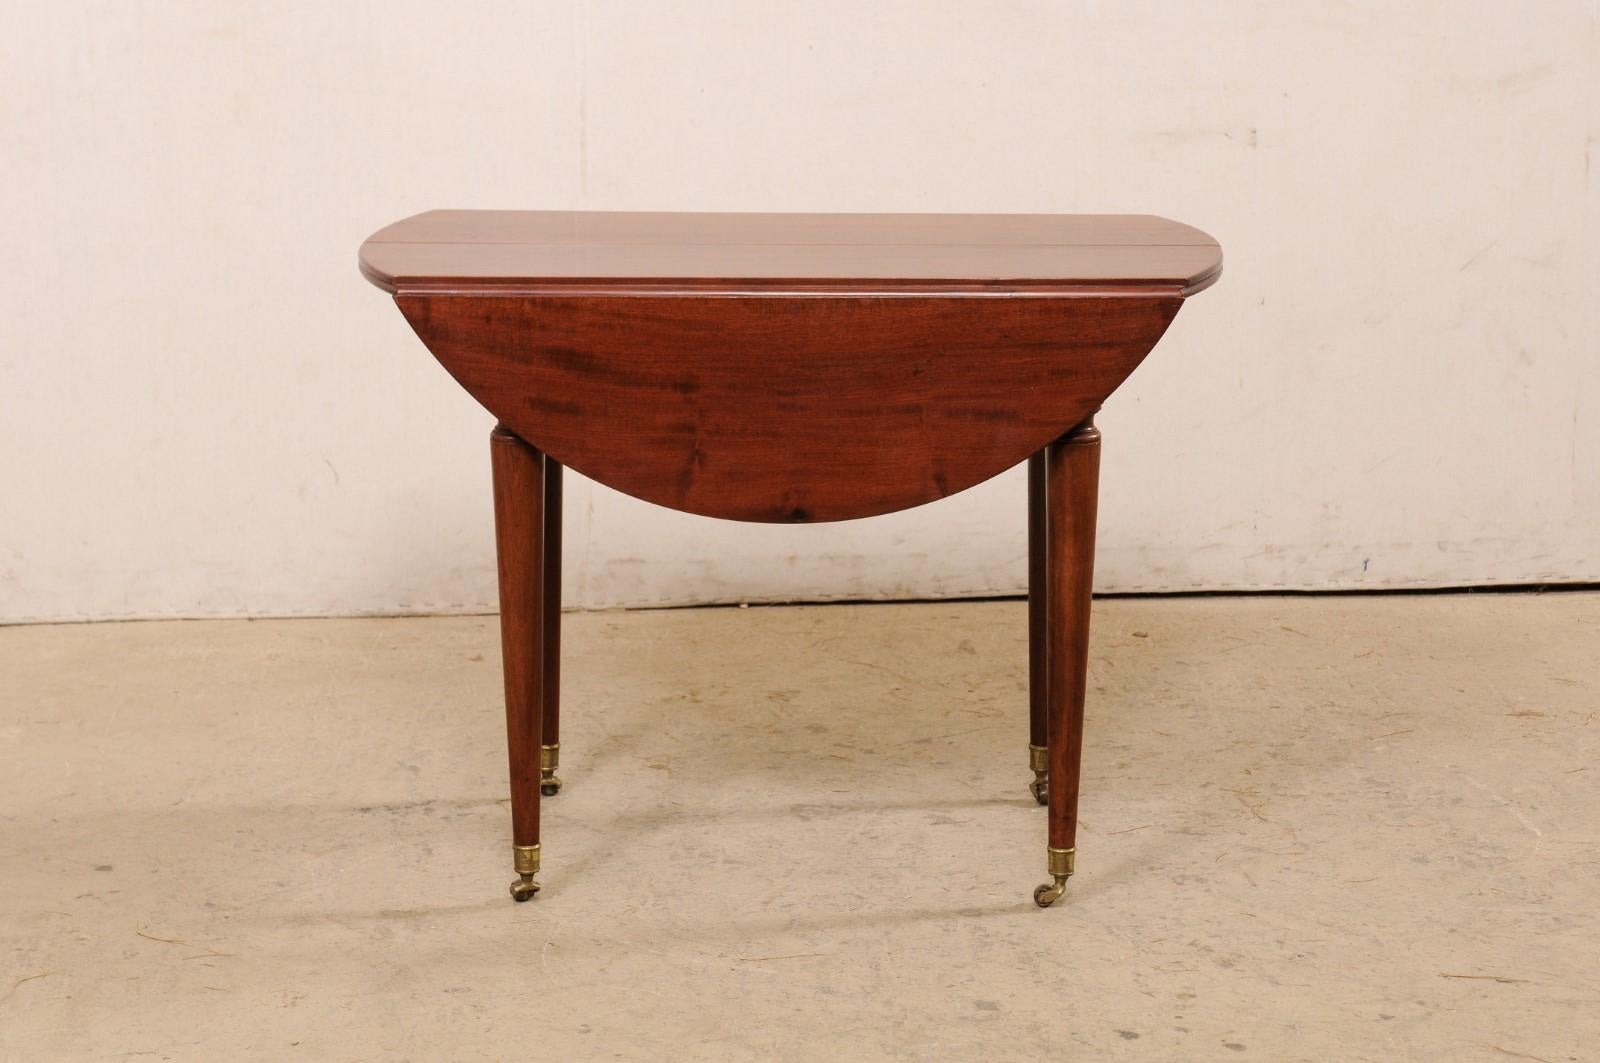 European French 19th C. Mahogany Round Table W/Drop Leaves & Petite Brass Caster Feet For Sale